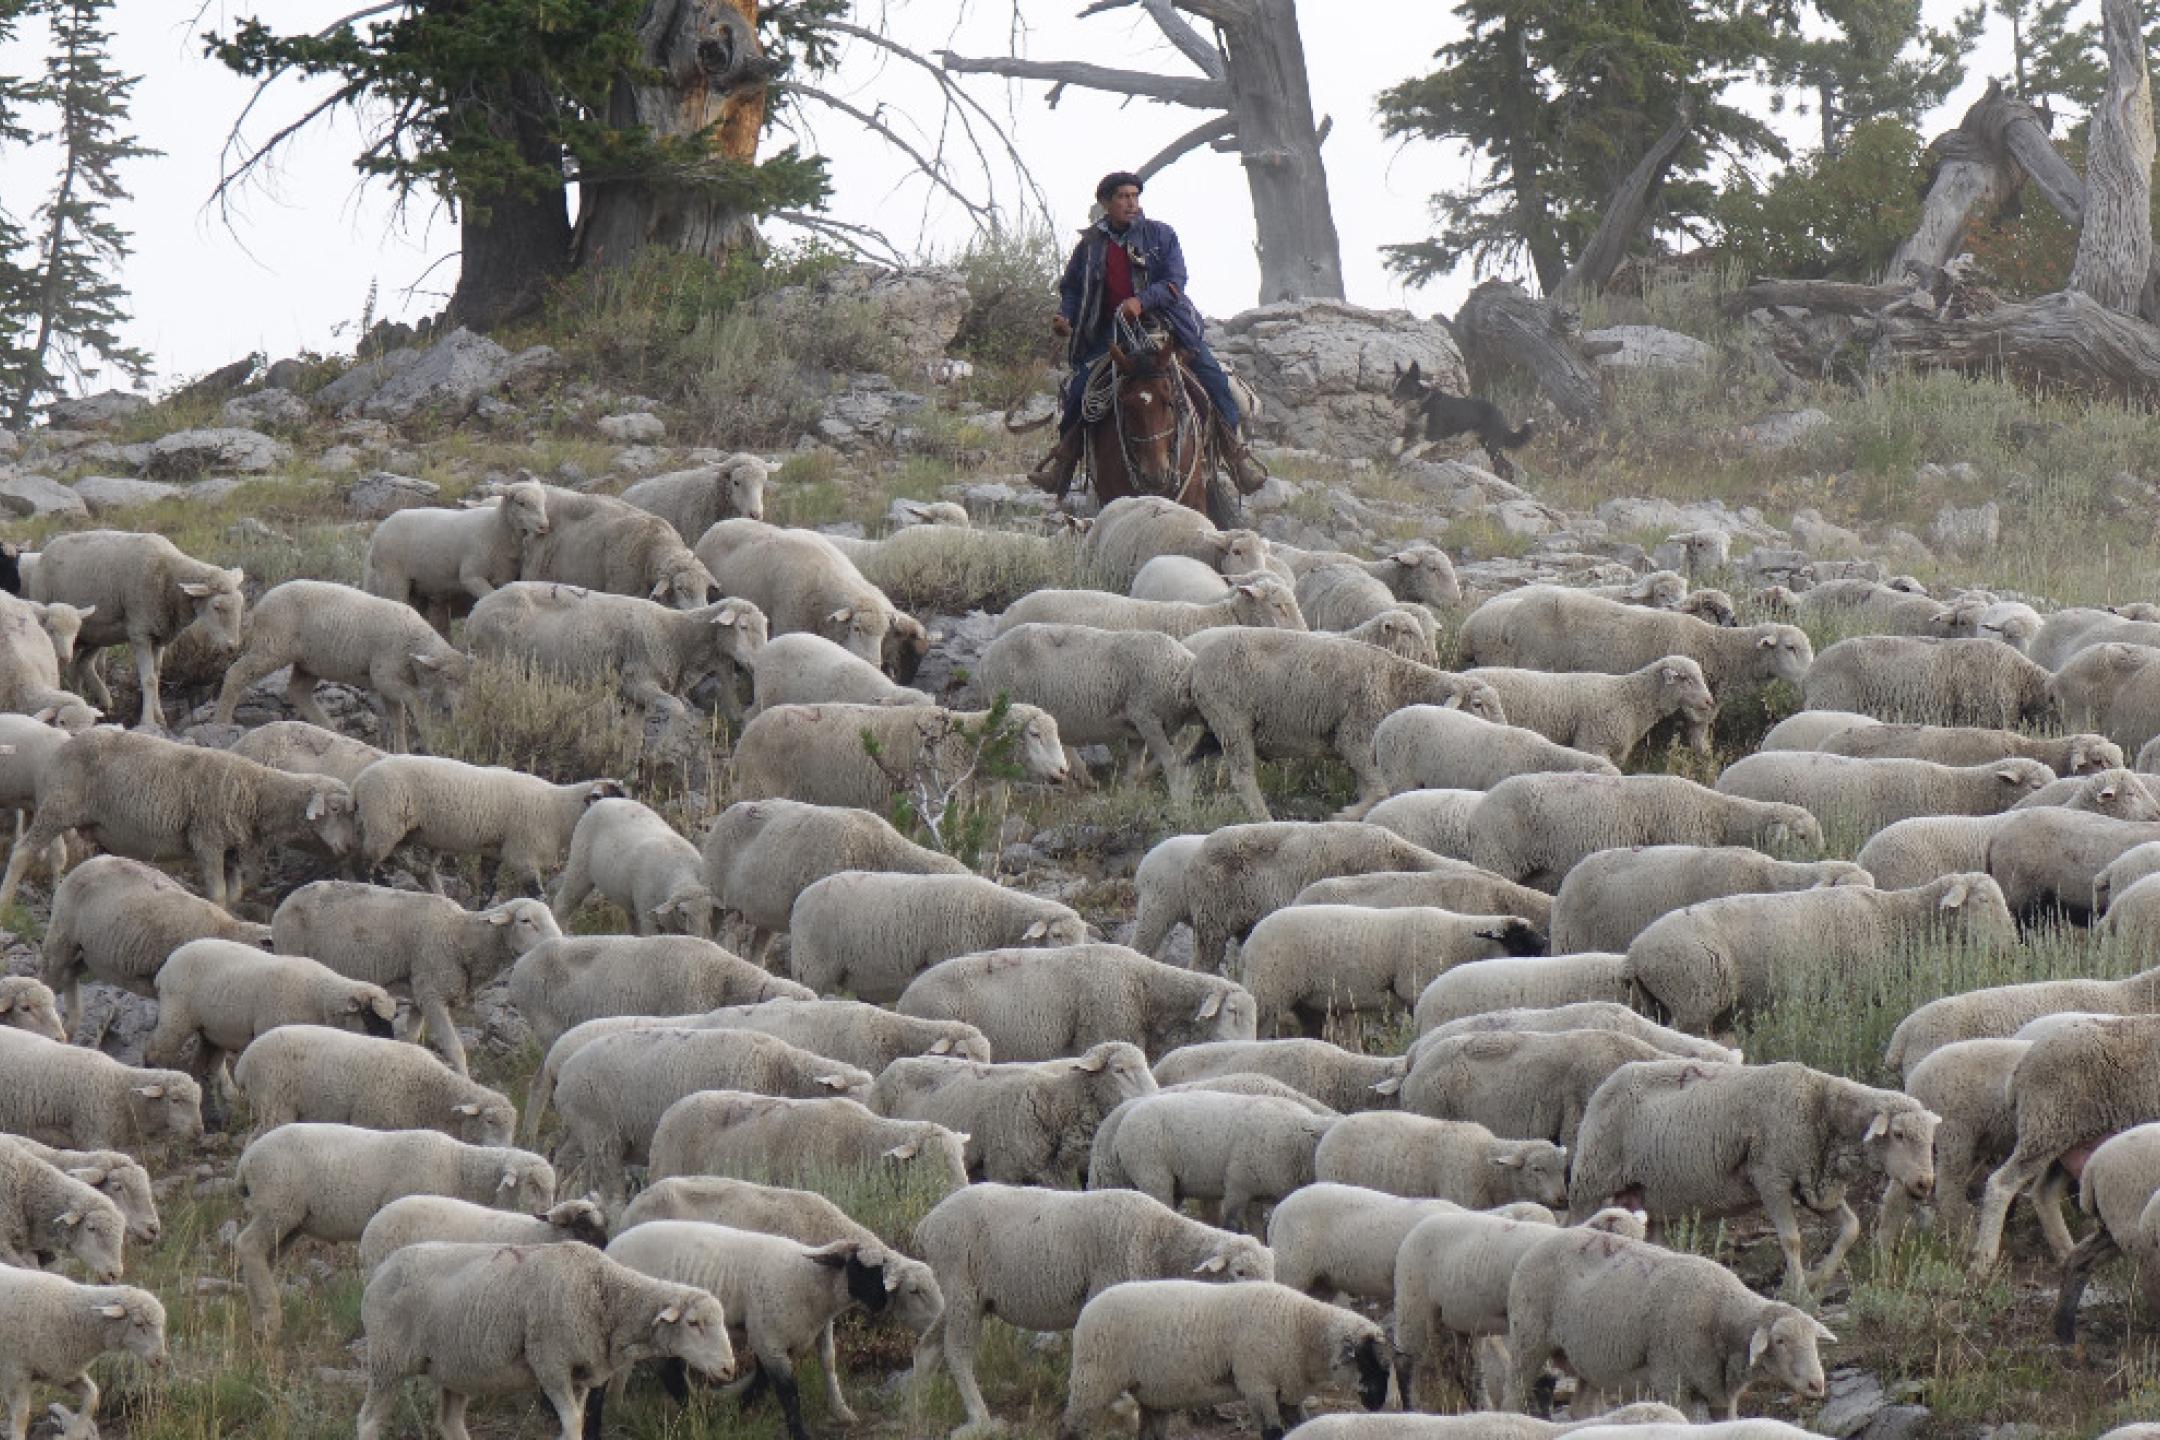 A man rides on his horse, surrounded by a huge flock of sheep.